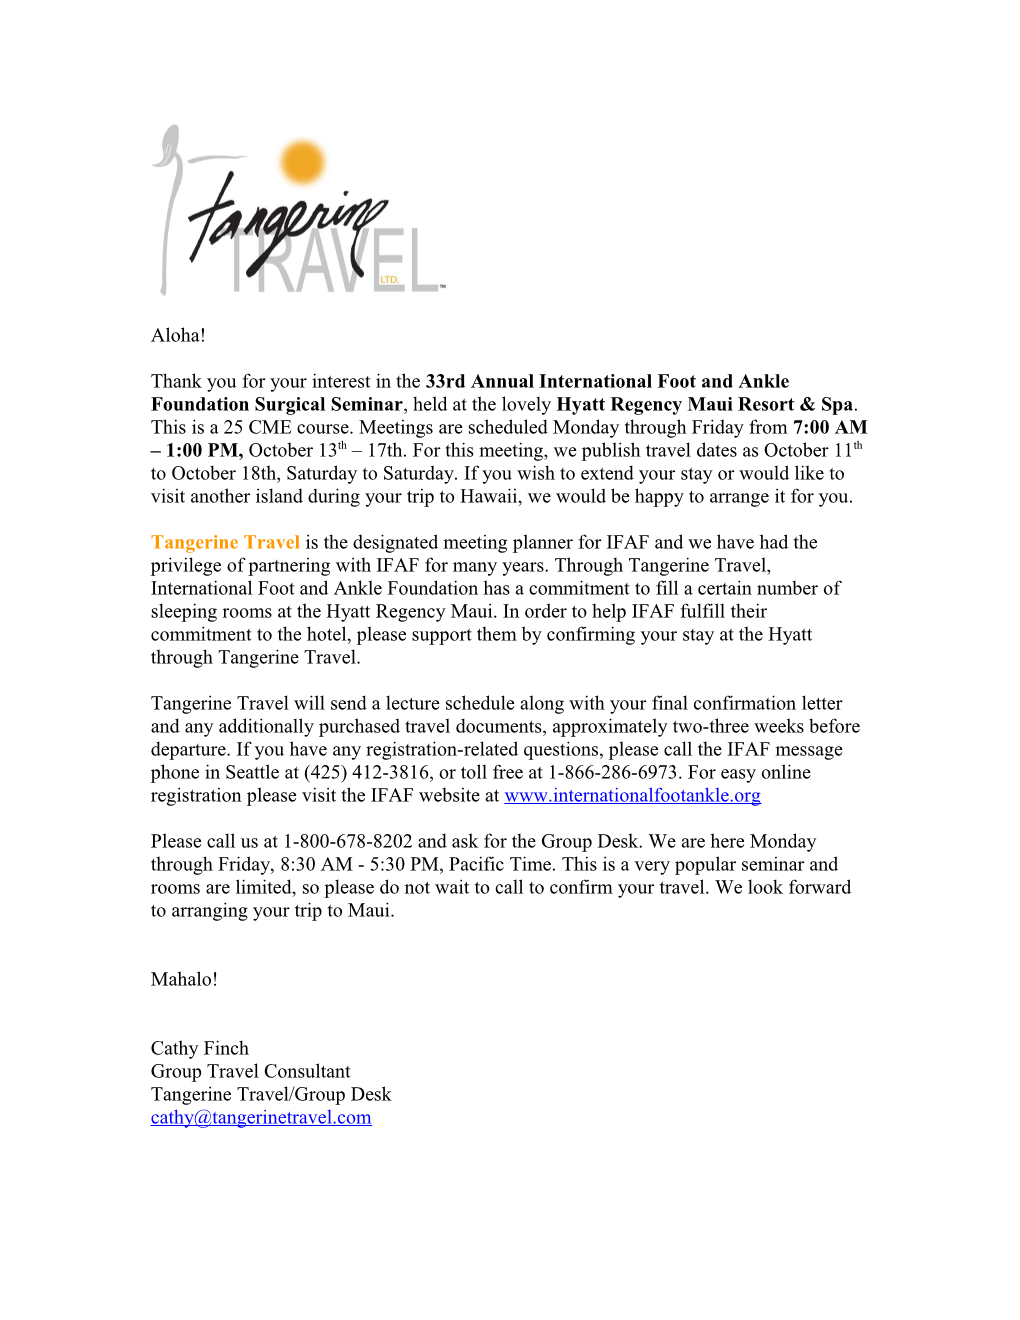 Tangerine Travel Is the Designated Meeting Planner for IFAF and We Have Had the Privilege